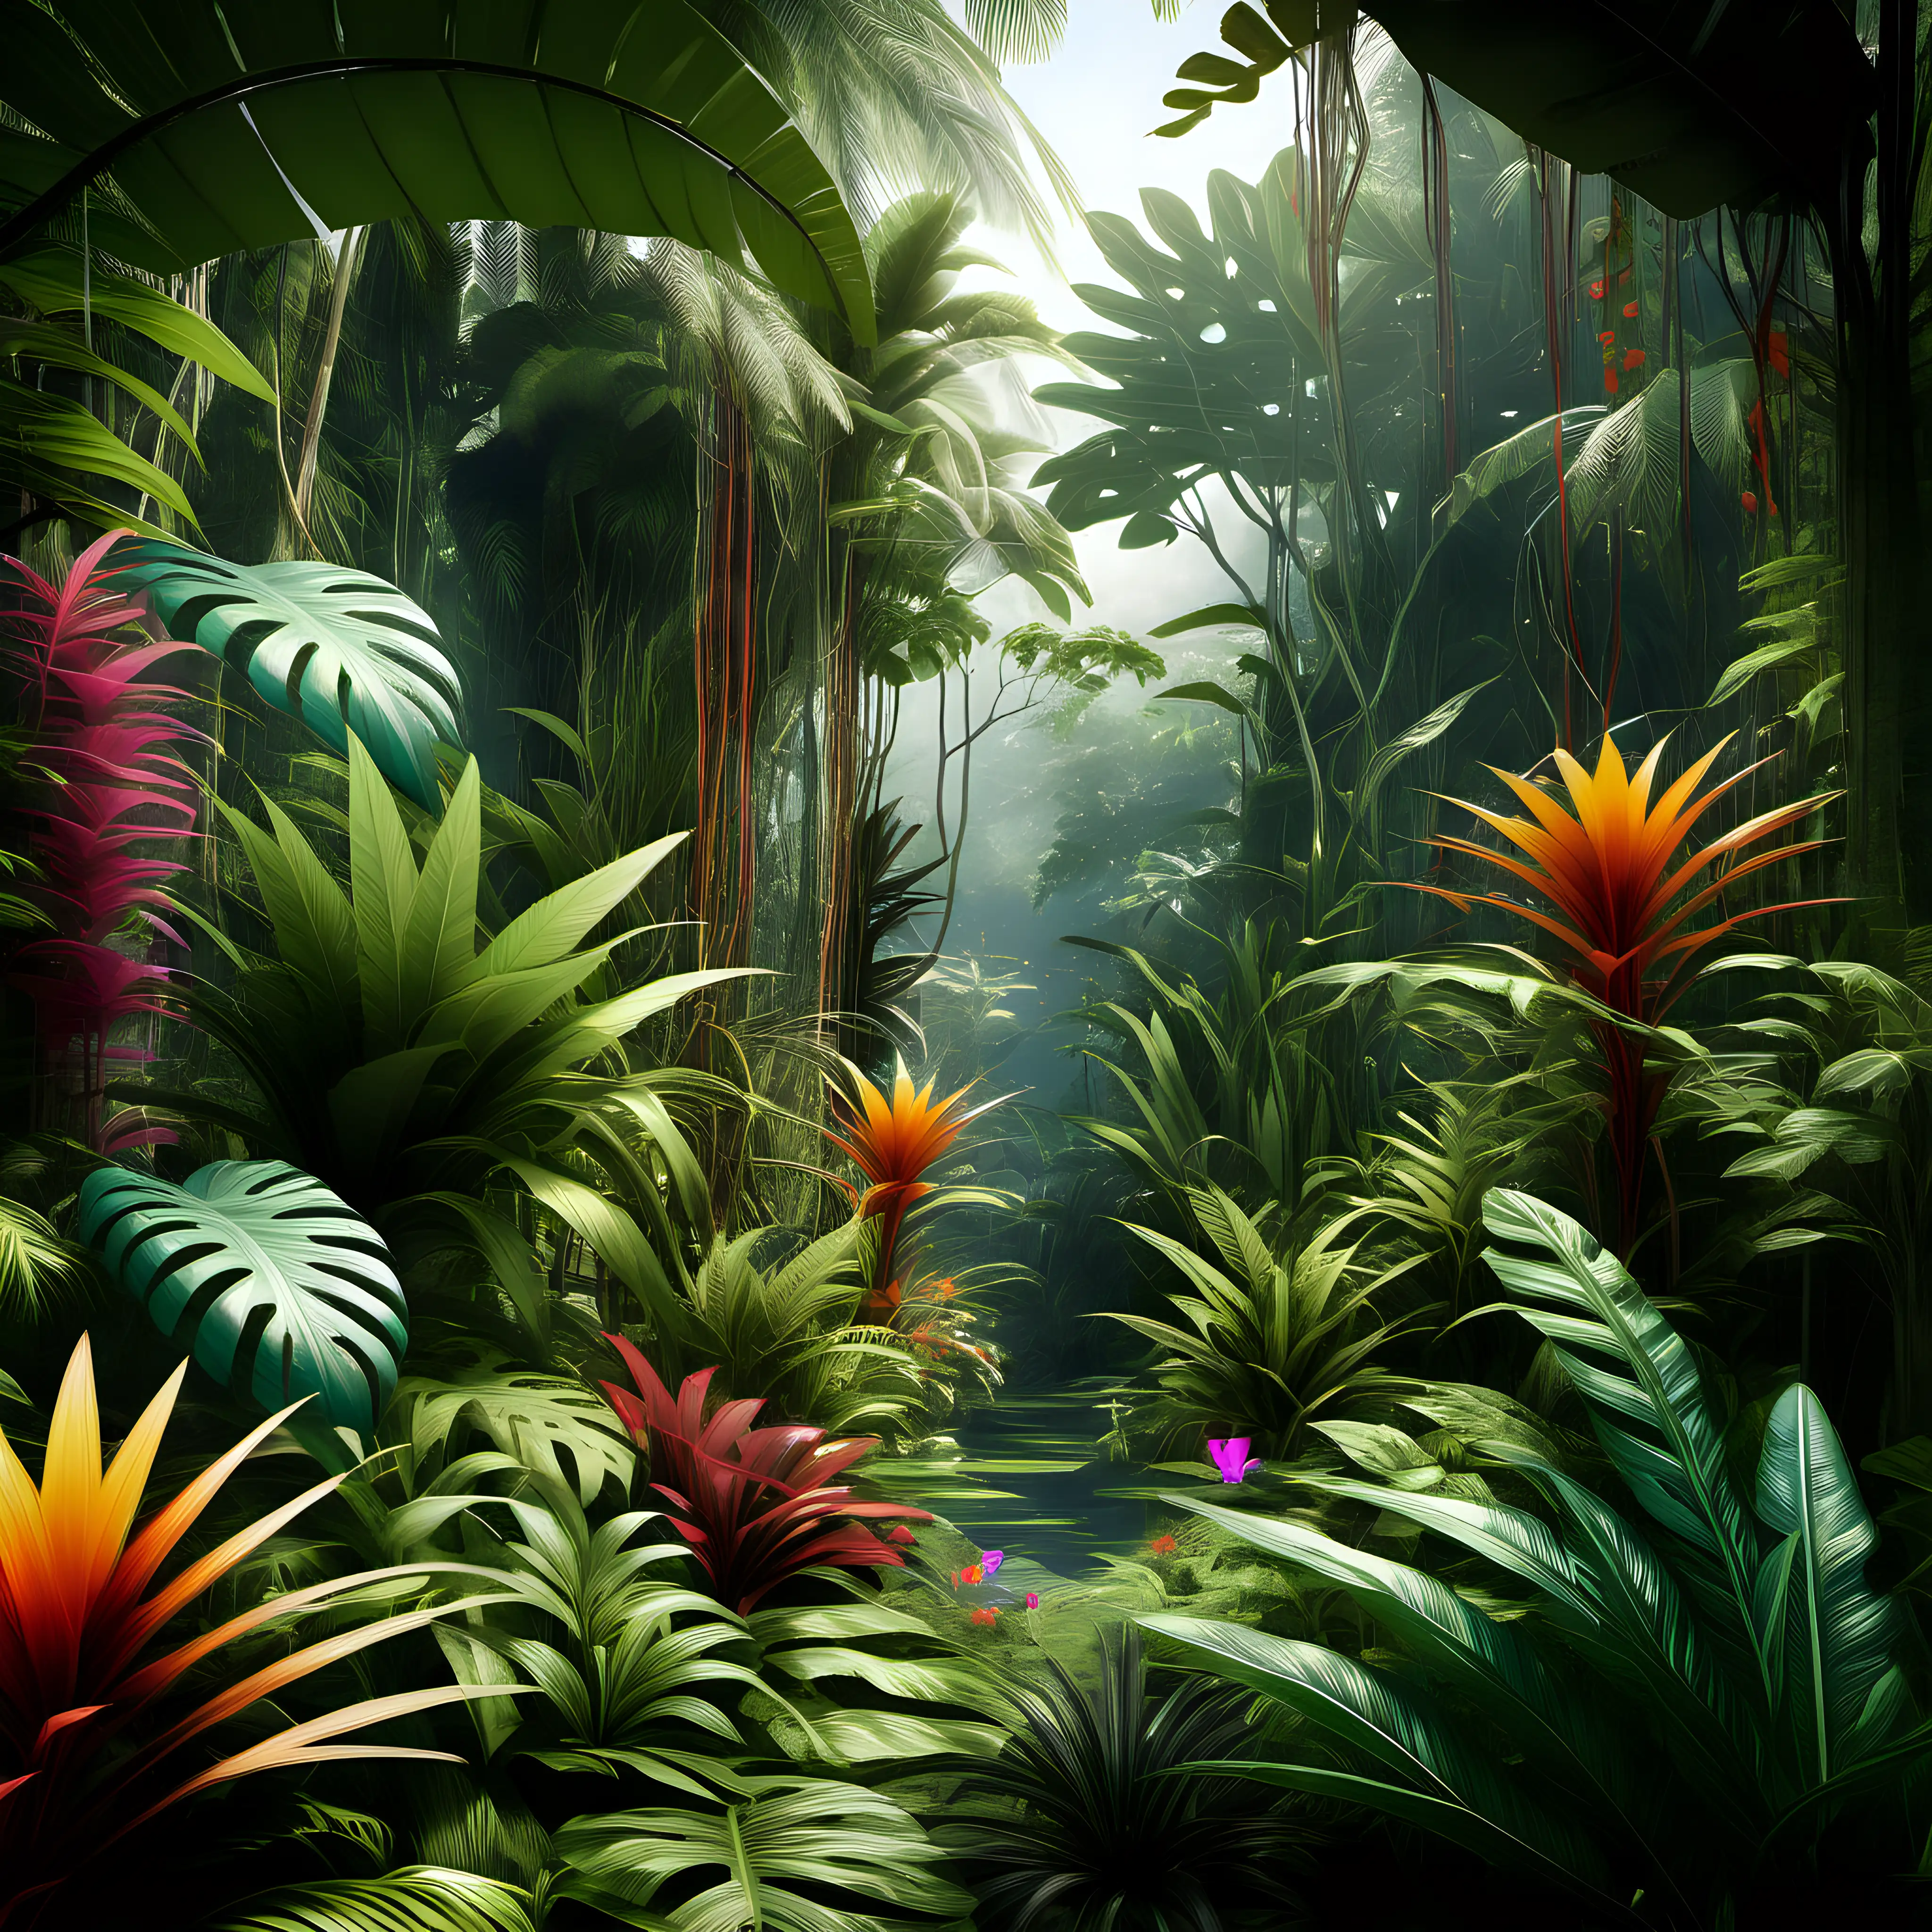 A detailed jungle paradise with colourful plant life